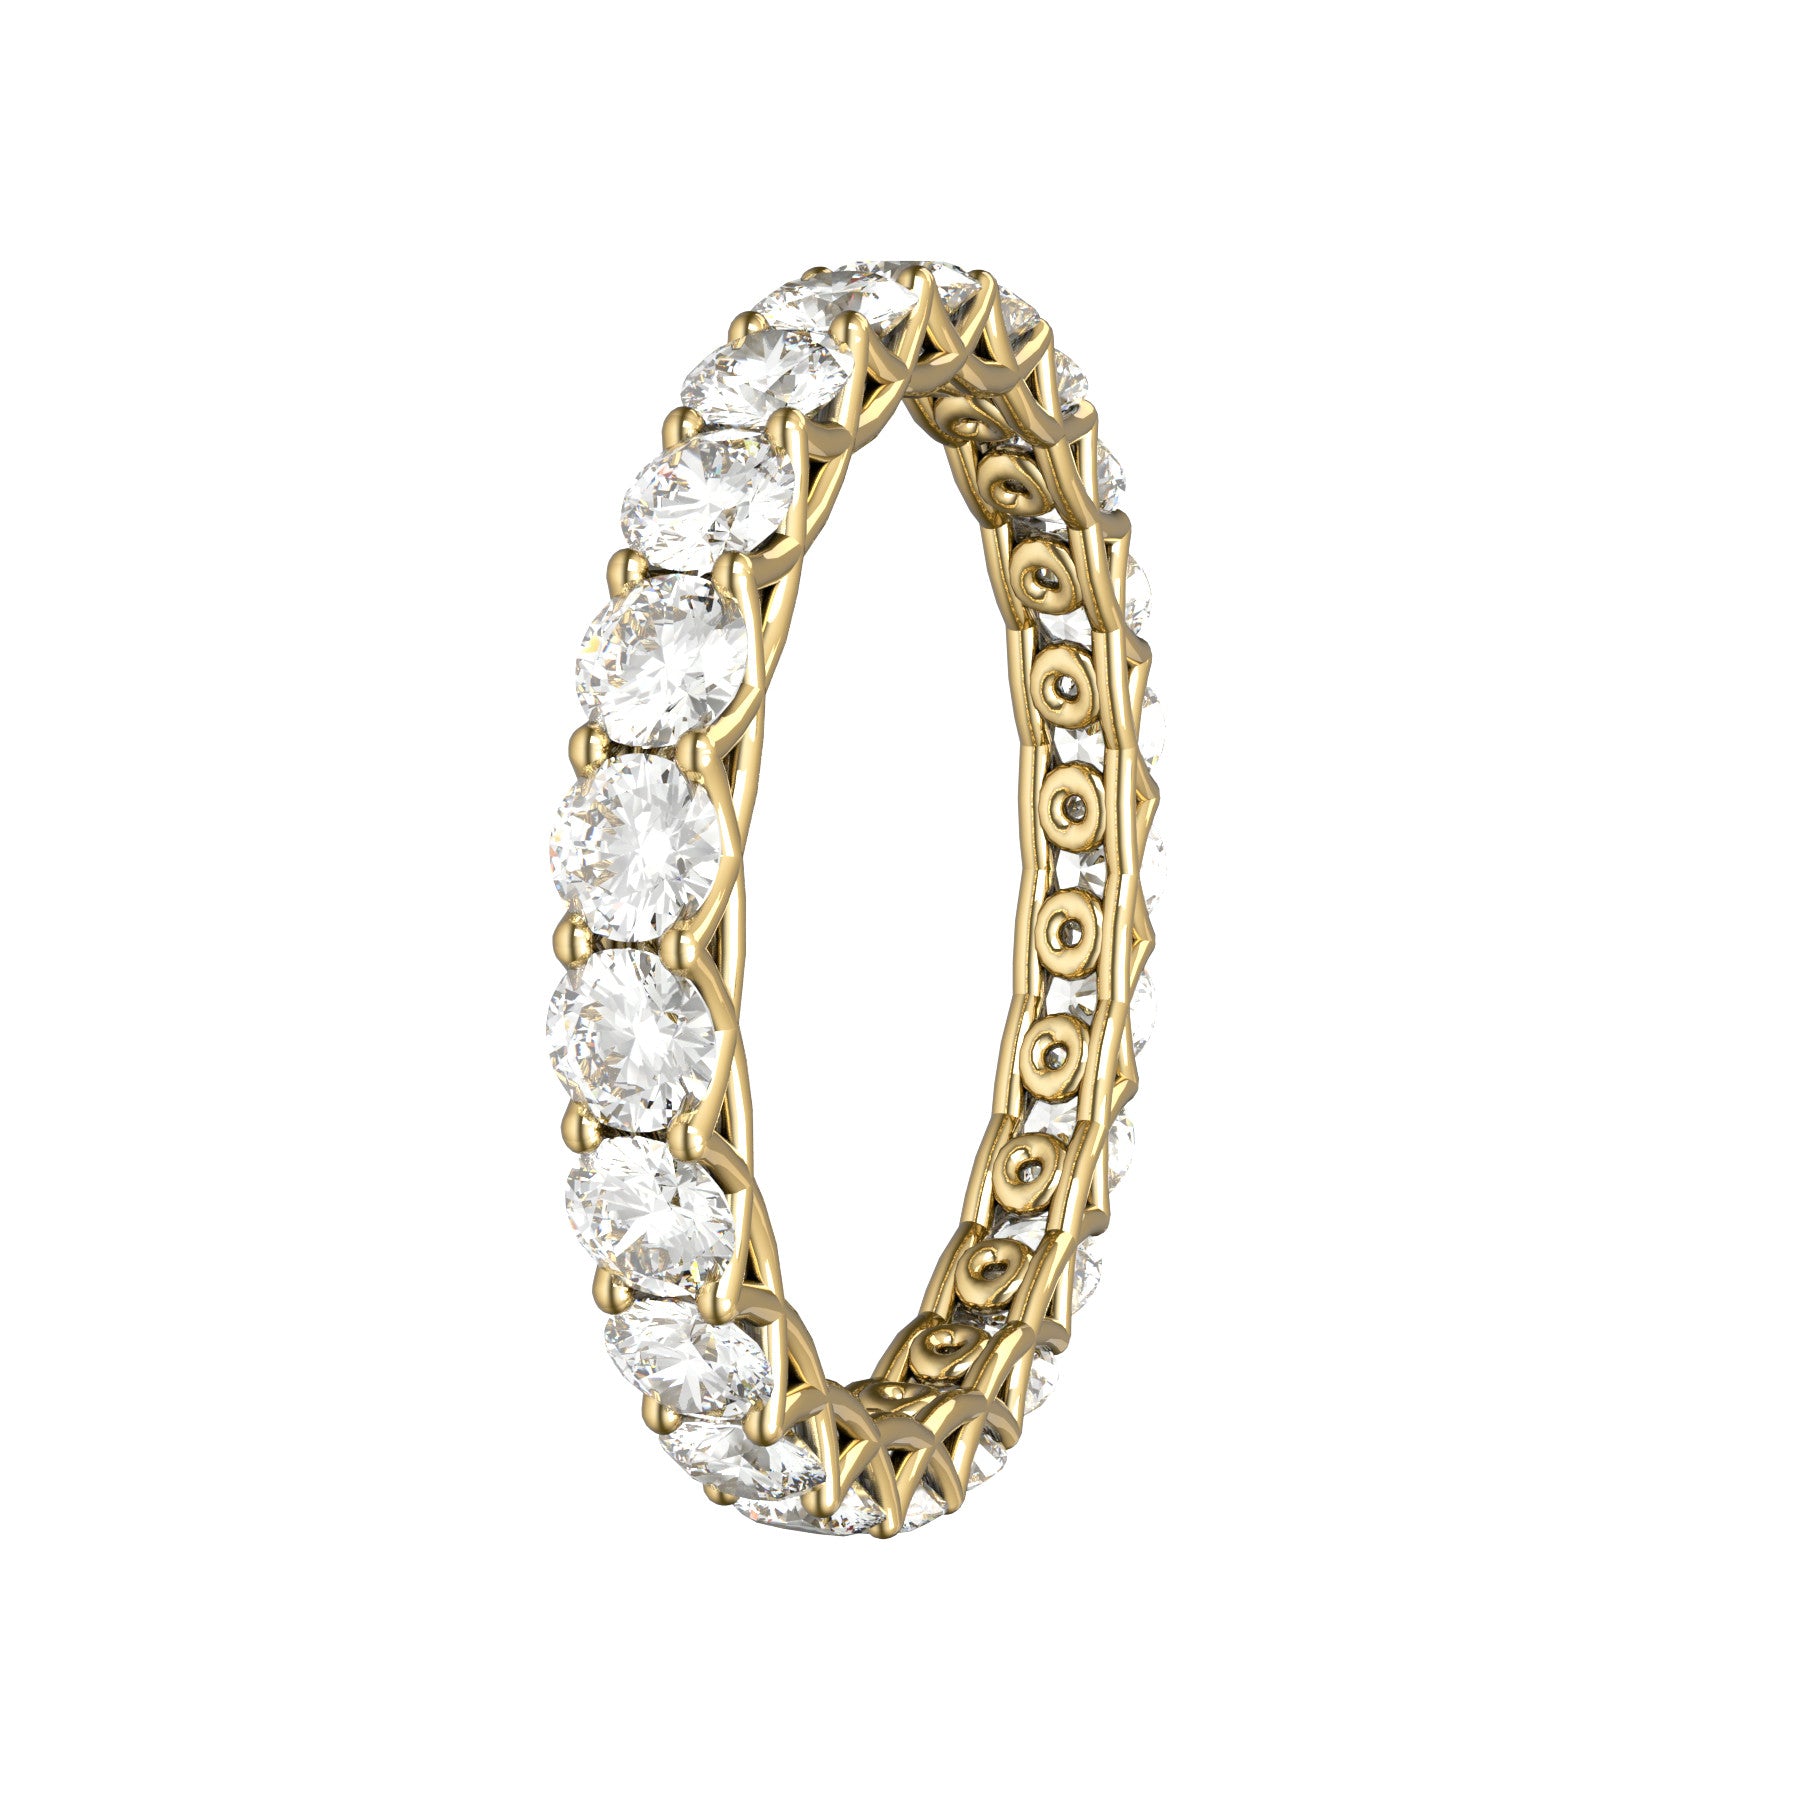 sweet hearts wedding band, 18 K yellow gold, 0,07 natural diamonds, weight about 1,50 g. (0.05 oz), width 2,65 mm